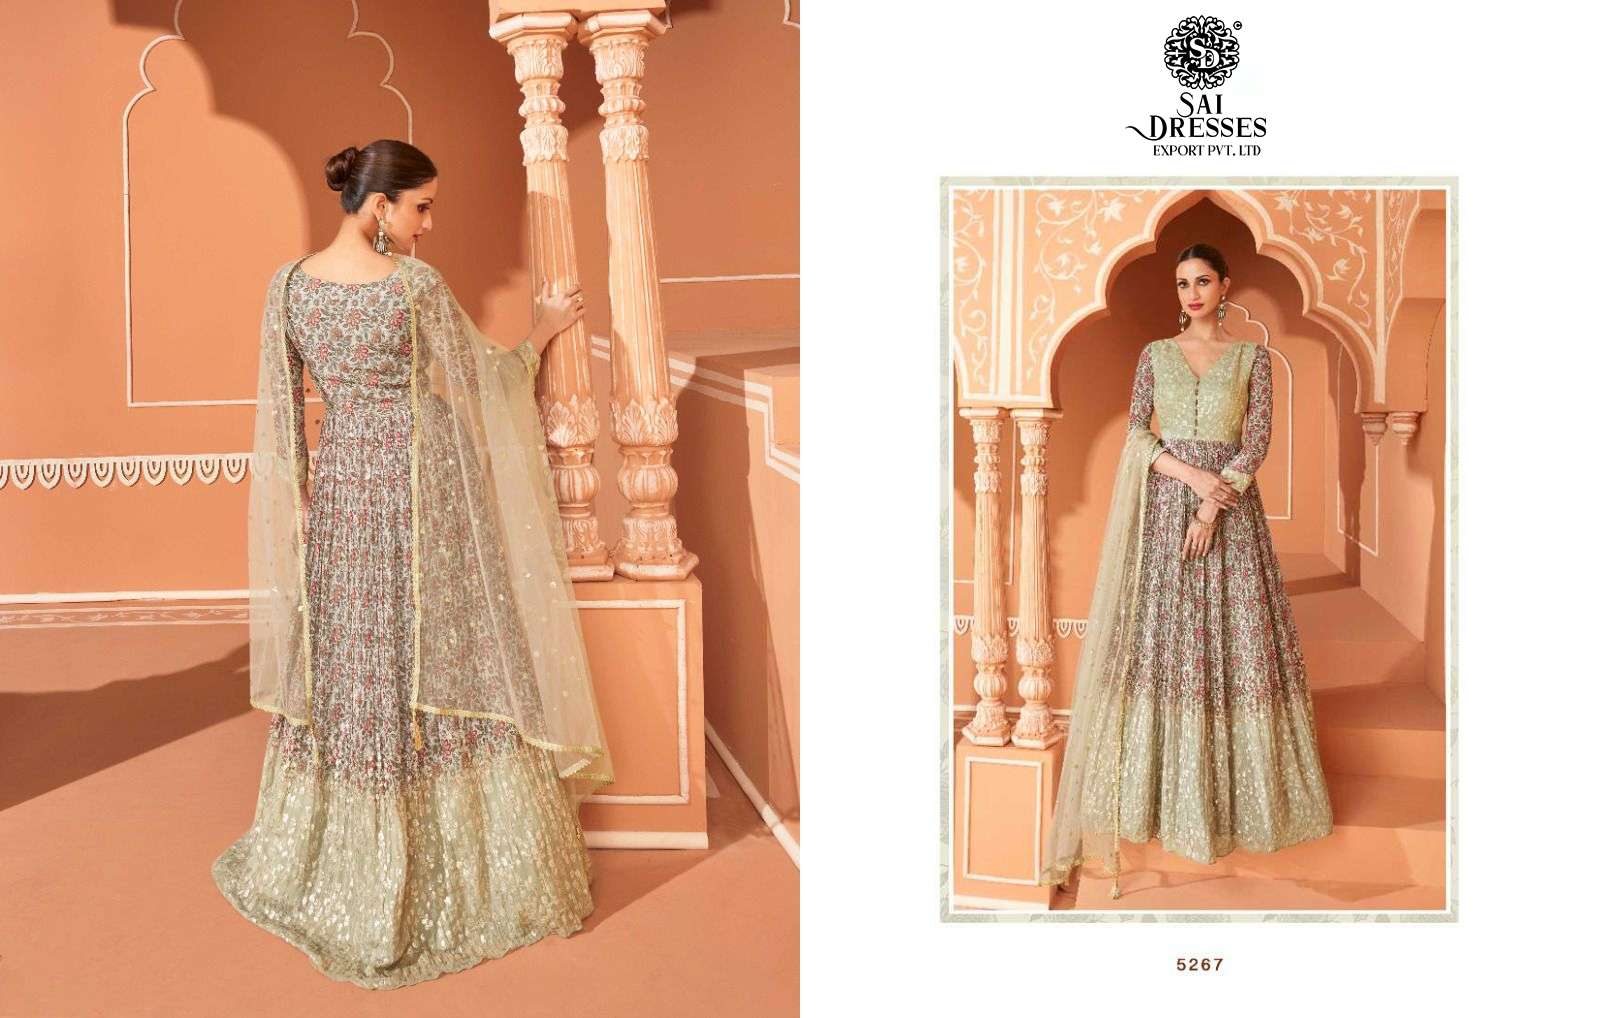 SAI DRESSES PRESENT SAHELI READYMADE PARTY WEAR DESIGNER LONG GOWN WITH DUPATTA IN WHOLESALE RATE IN SURAT